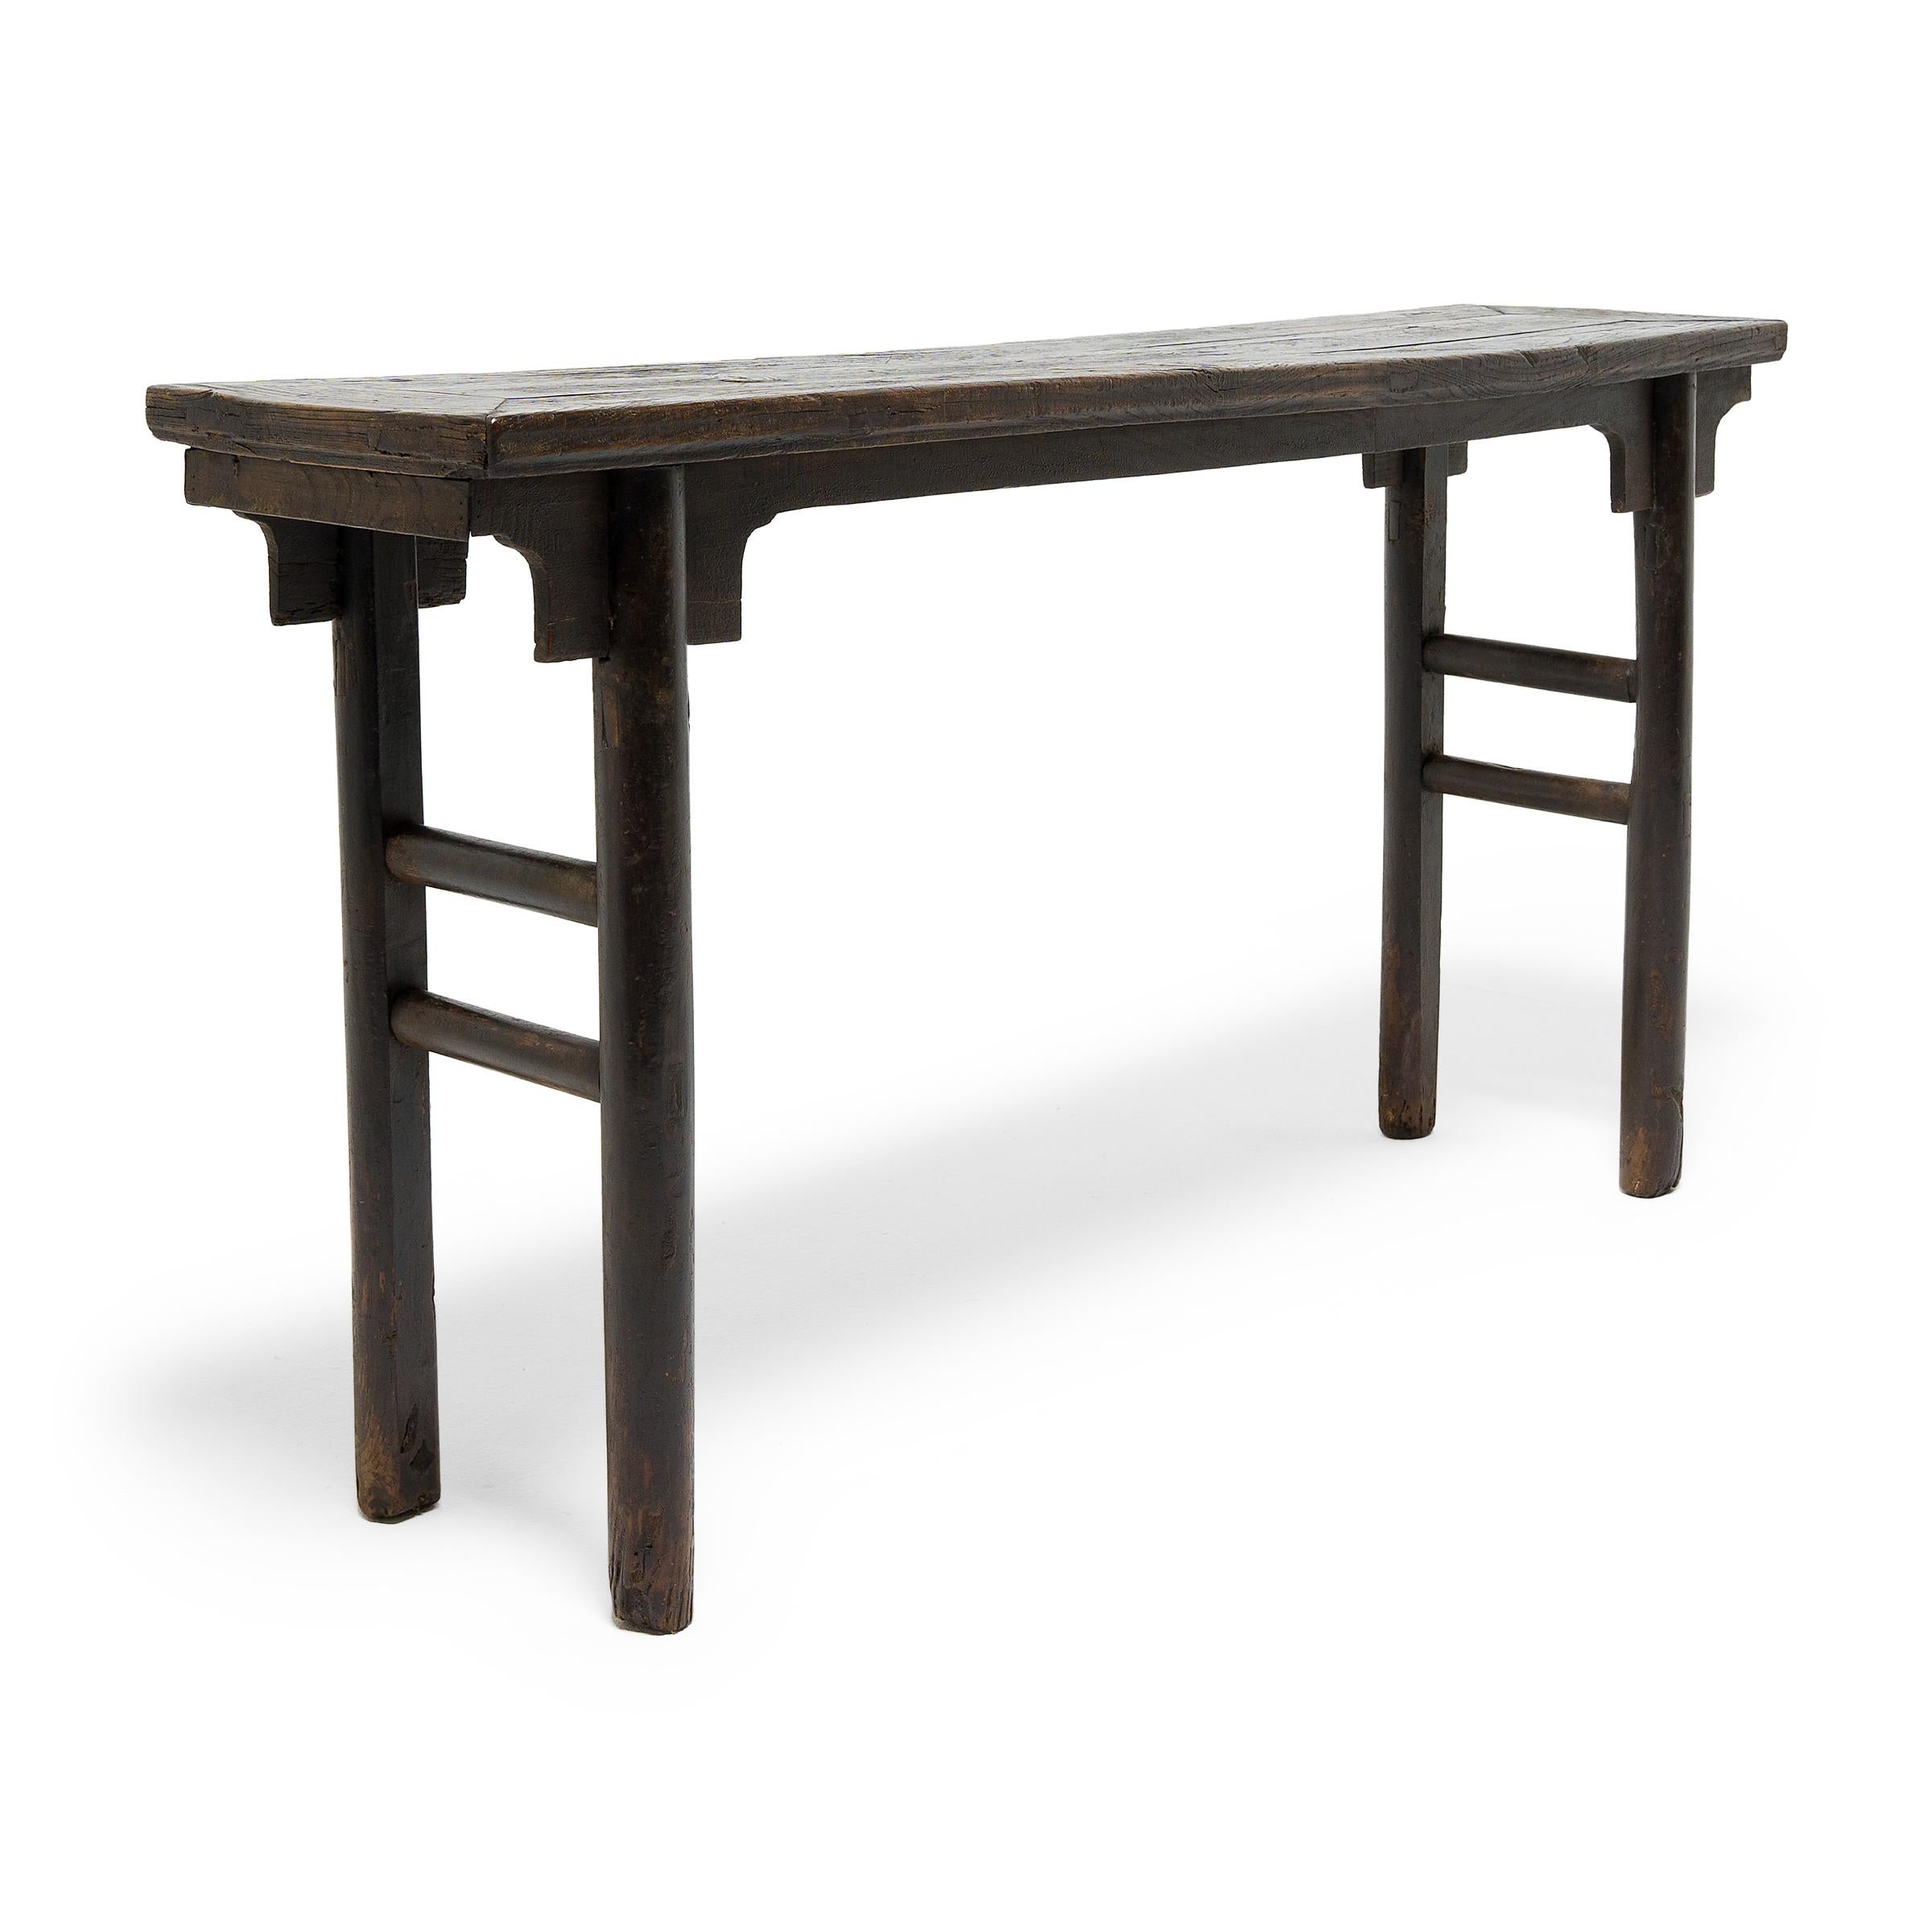 19th Century Chinese Round Leg Altar Table, c. 1800 For Sale